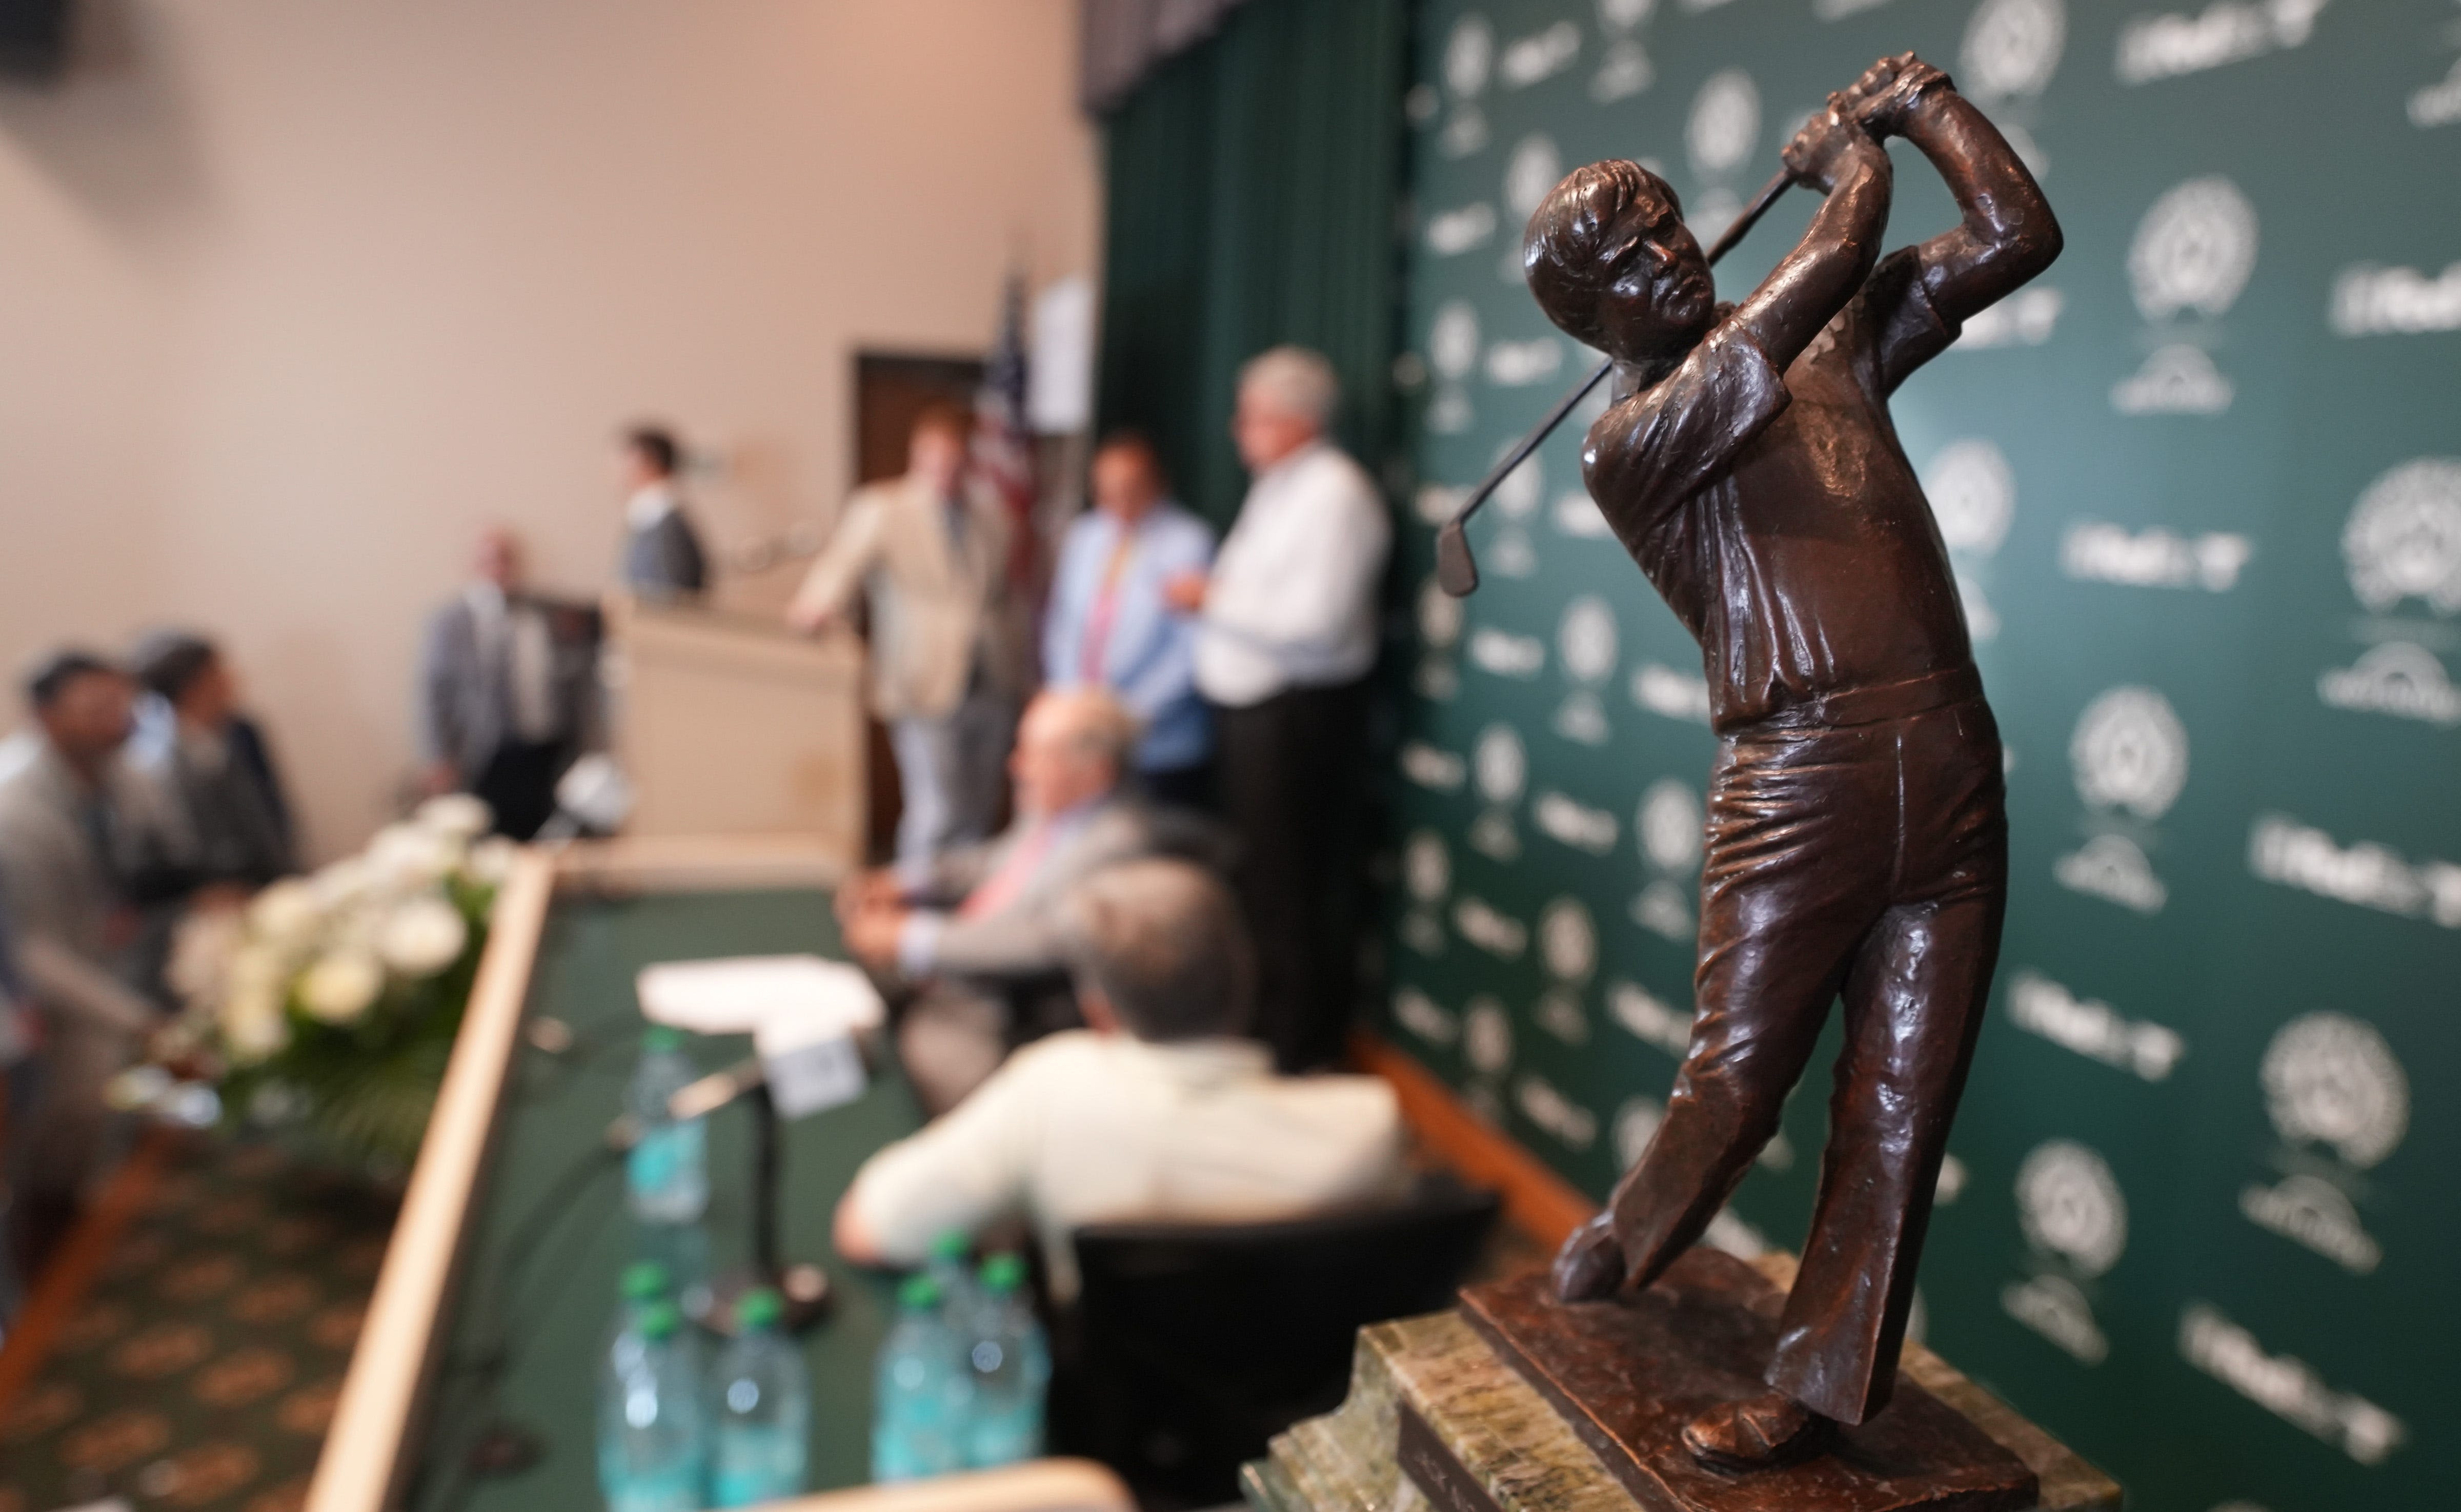 Jack Nicklaus says discussion of returning Memorial to traditional date 'in process'